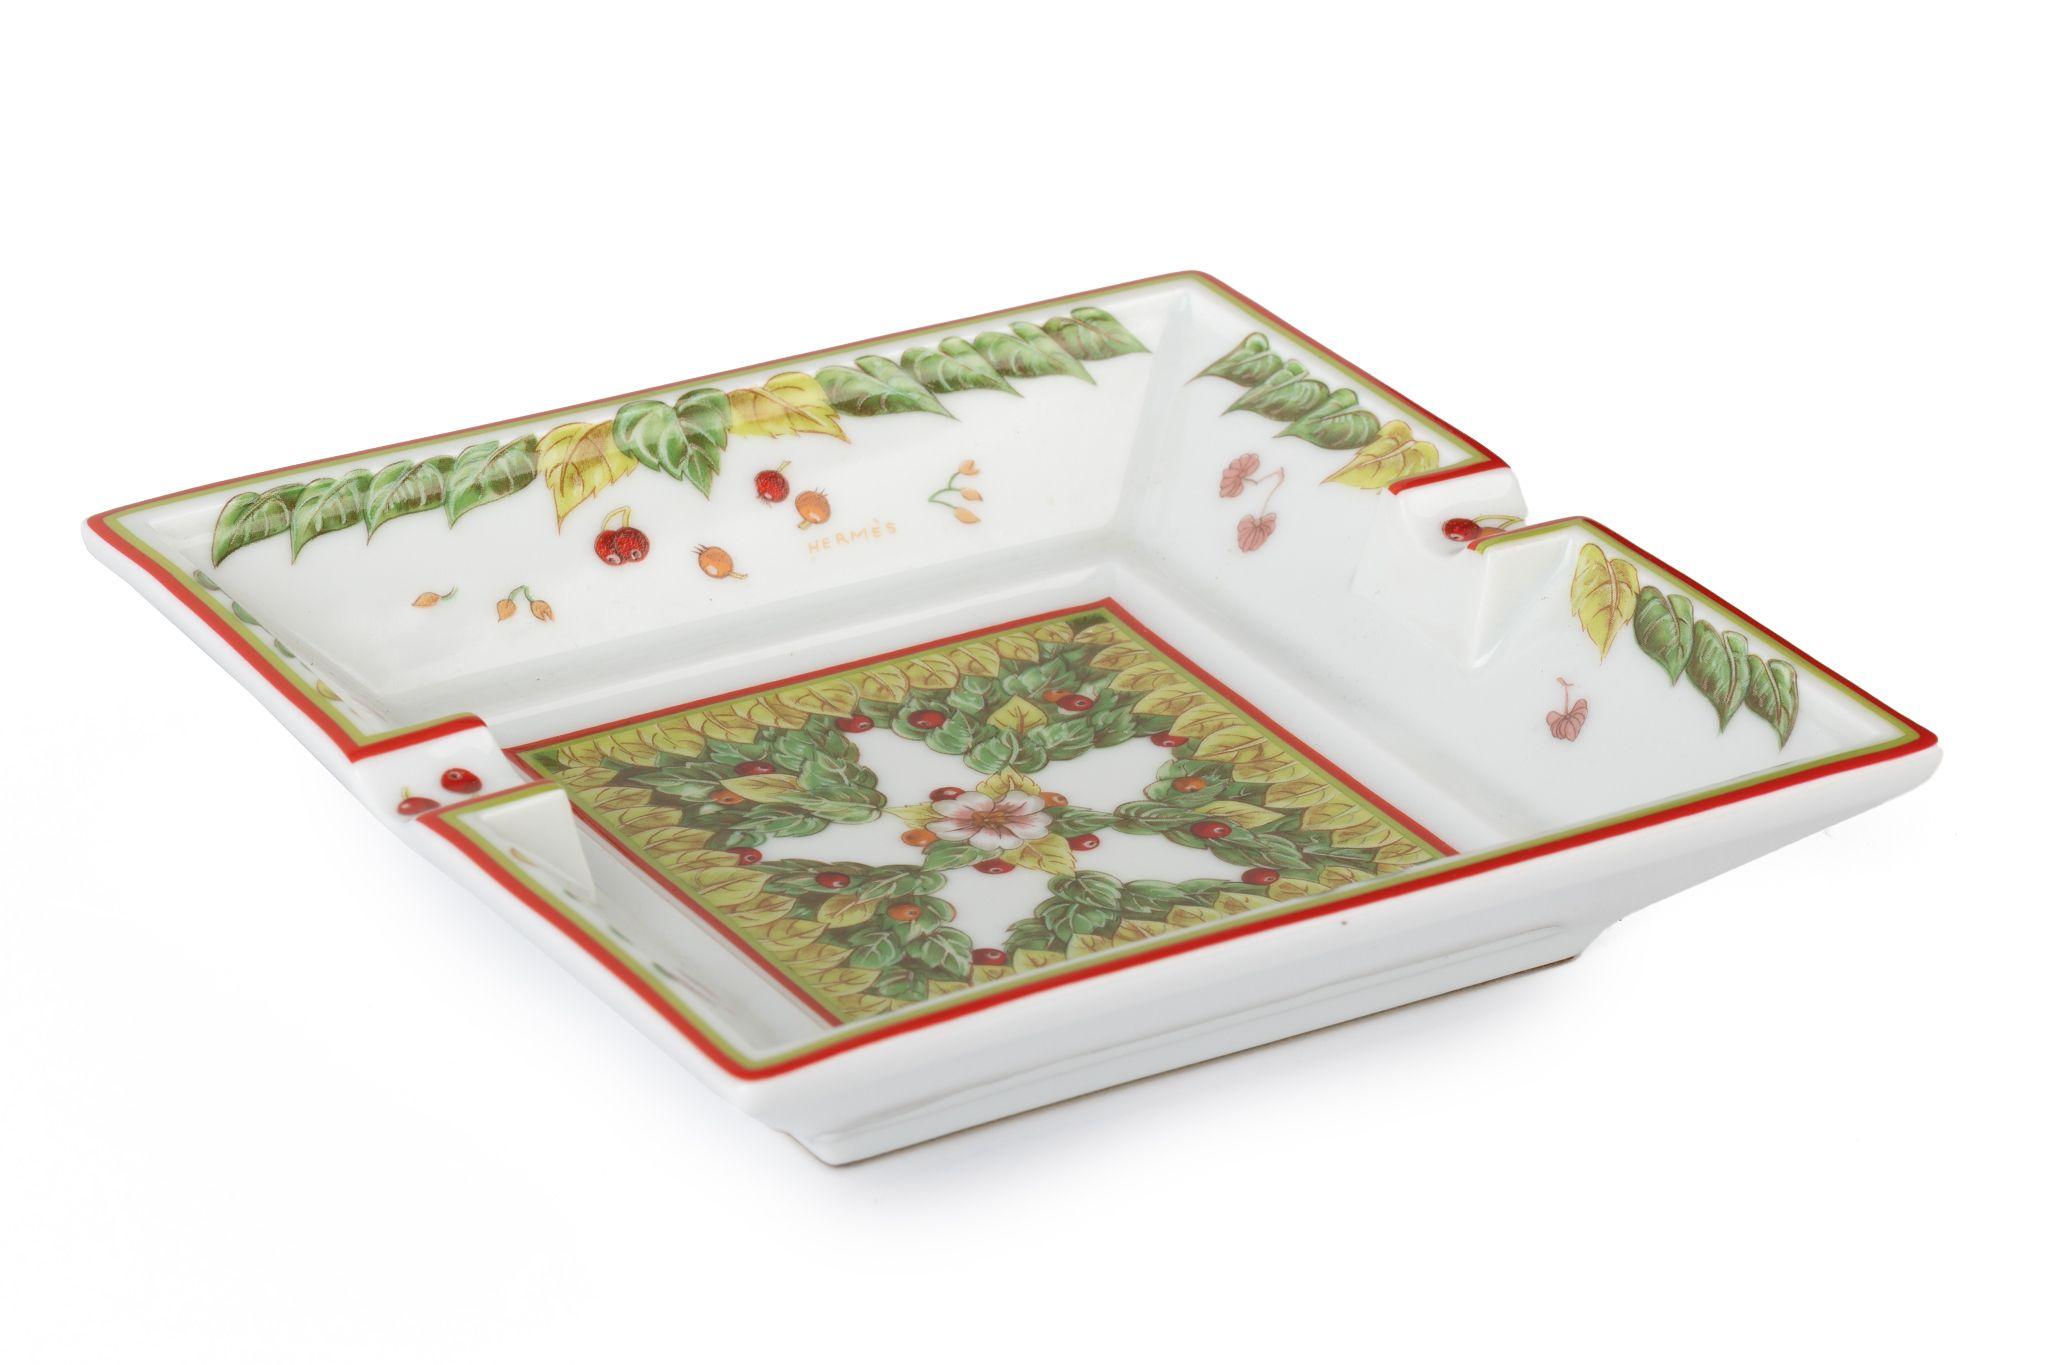 Hermes square porcelain ashtray with Christmas decorations. Excellent condition.